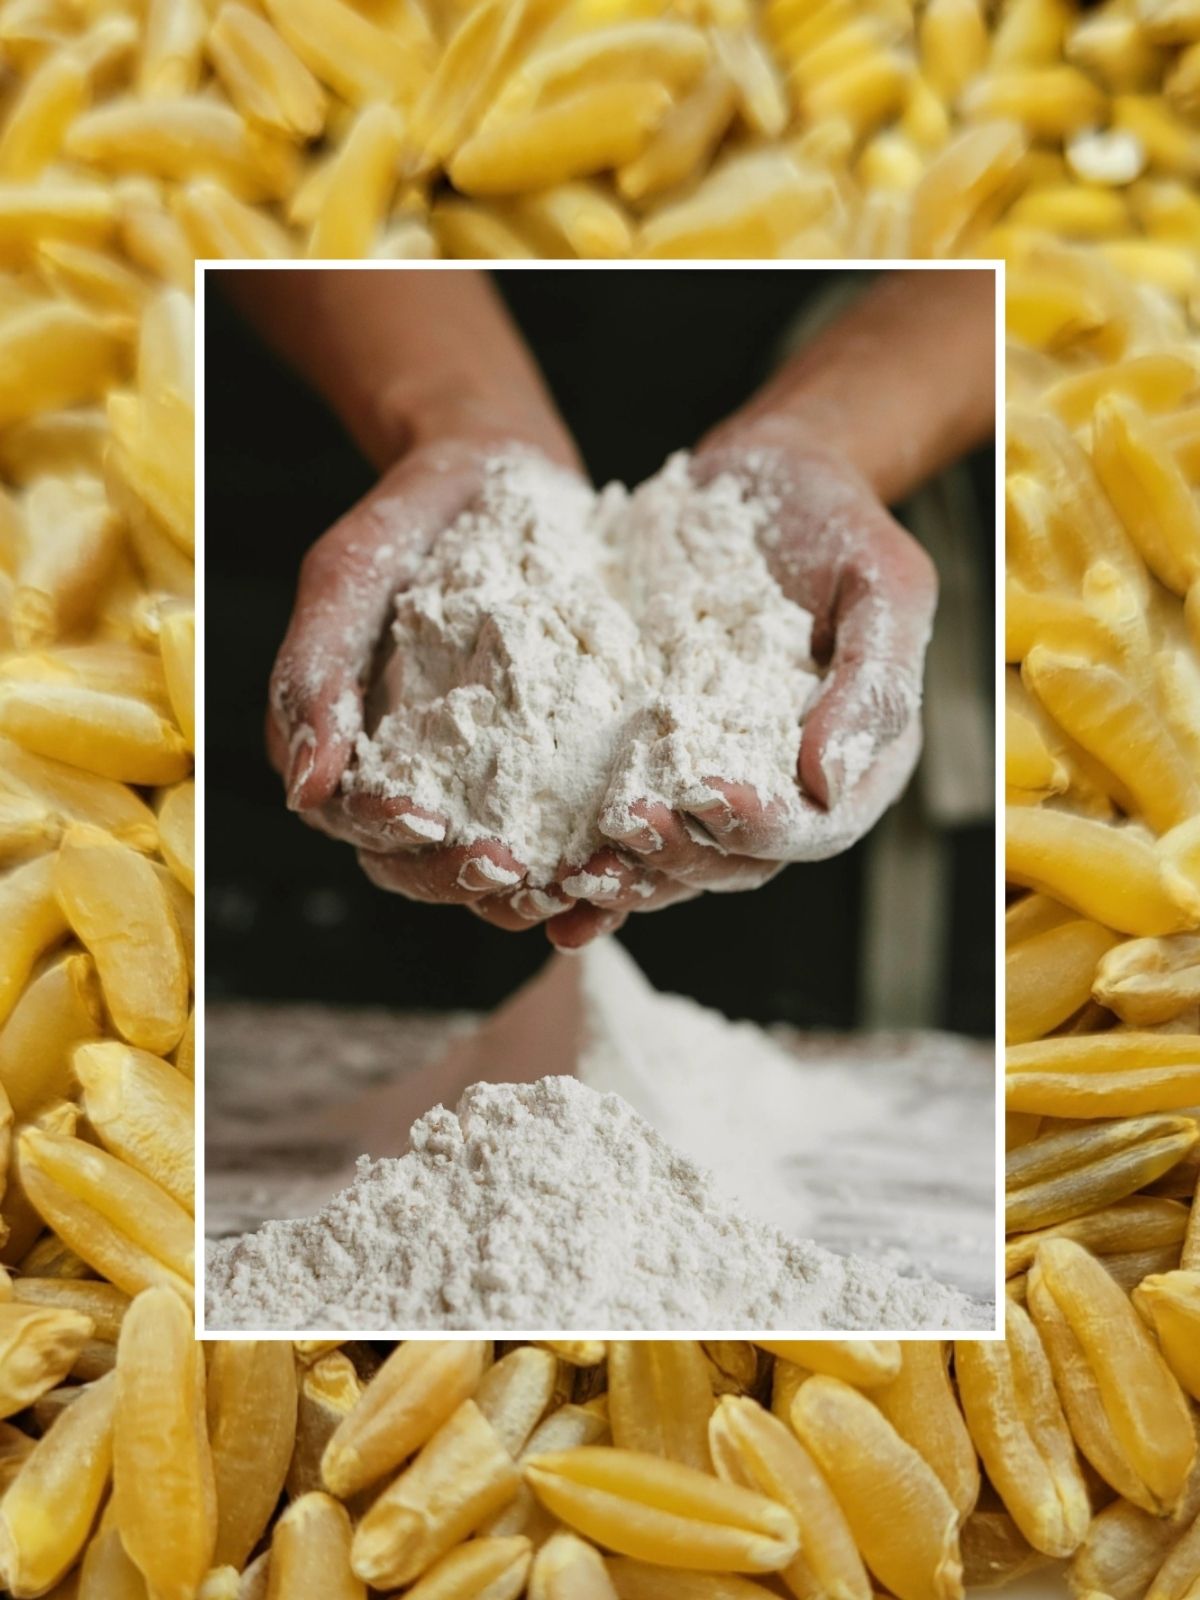 a close up of wheat berries behind a photo of hands holding AP (All-Purpose) Flour from Fresh Milled Flour